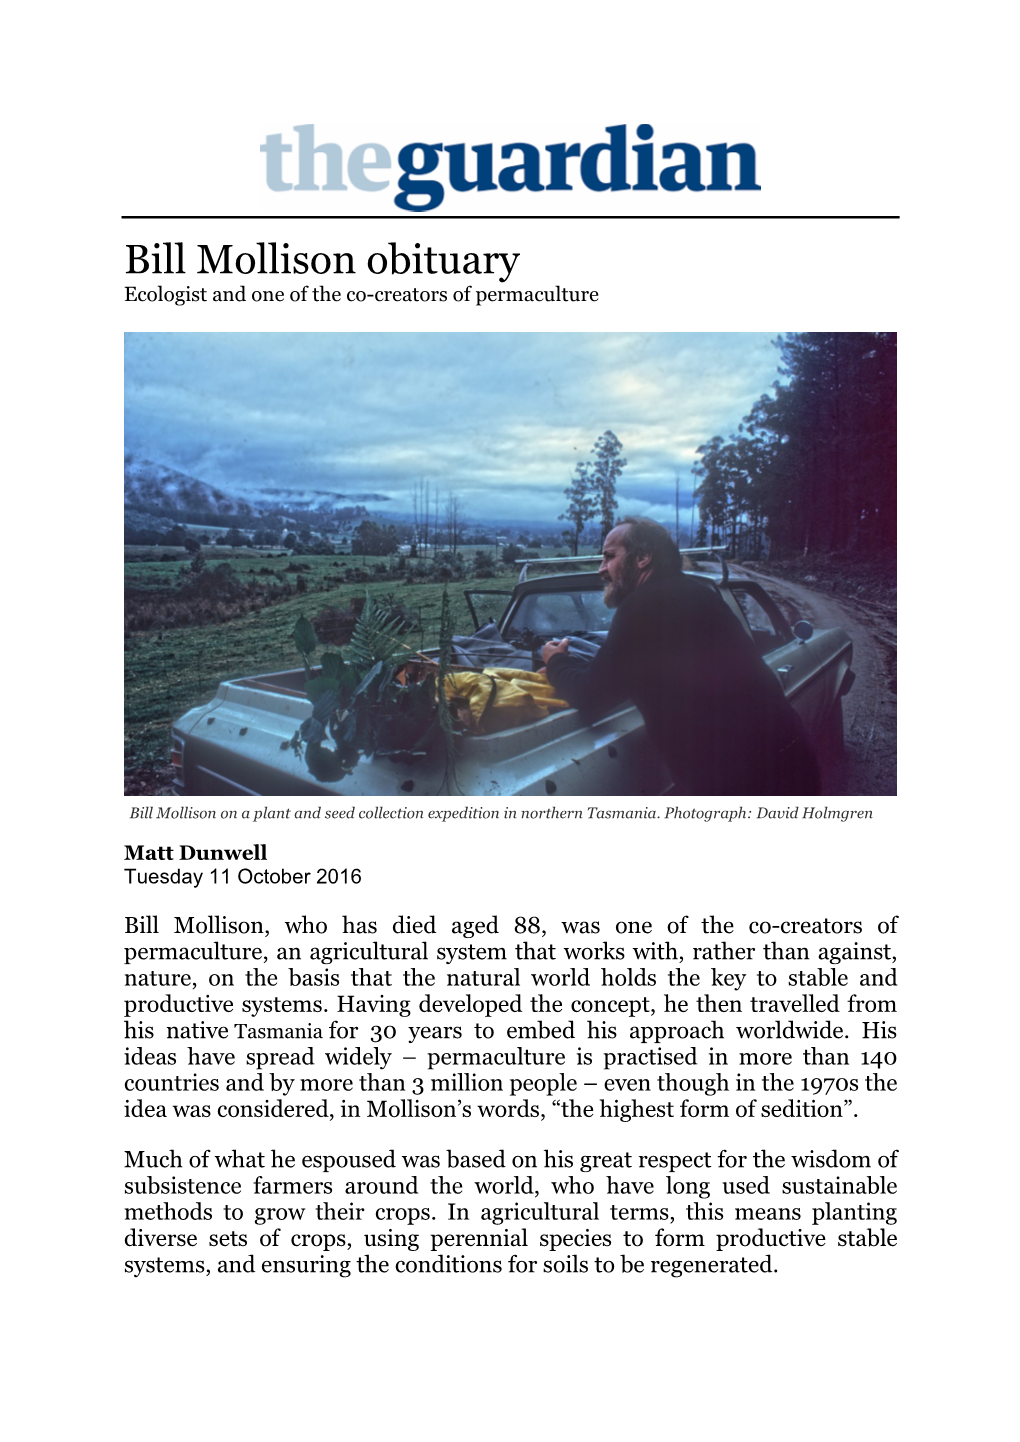 Bill Mollison Obituary Ecologist and One of the Co-Creators of Permaculture